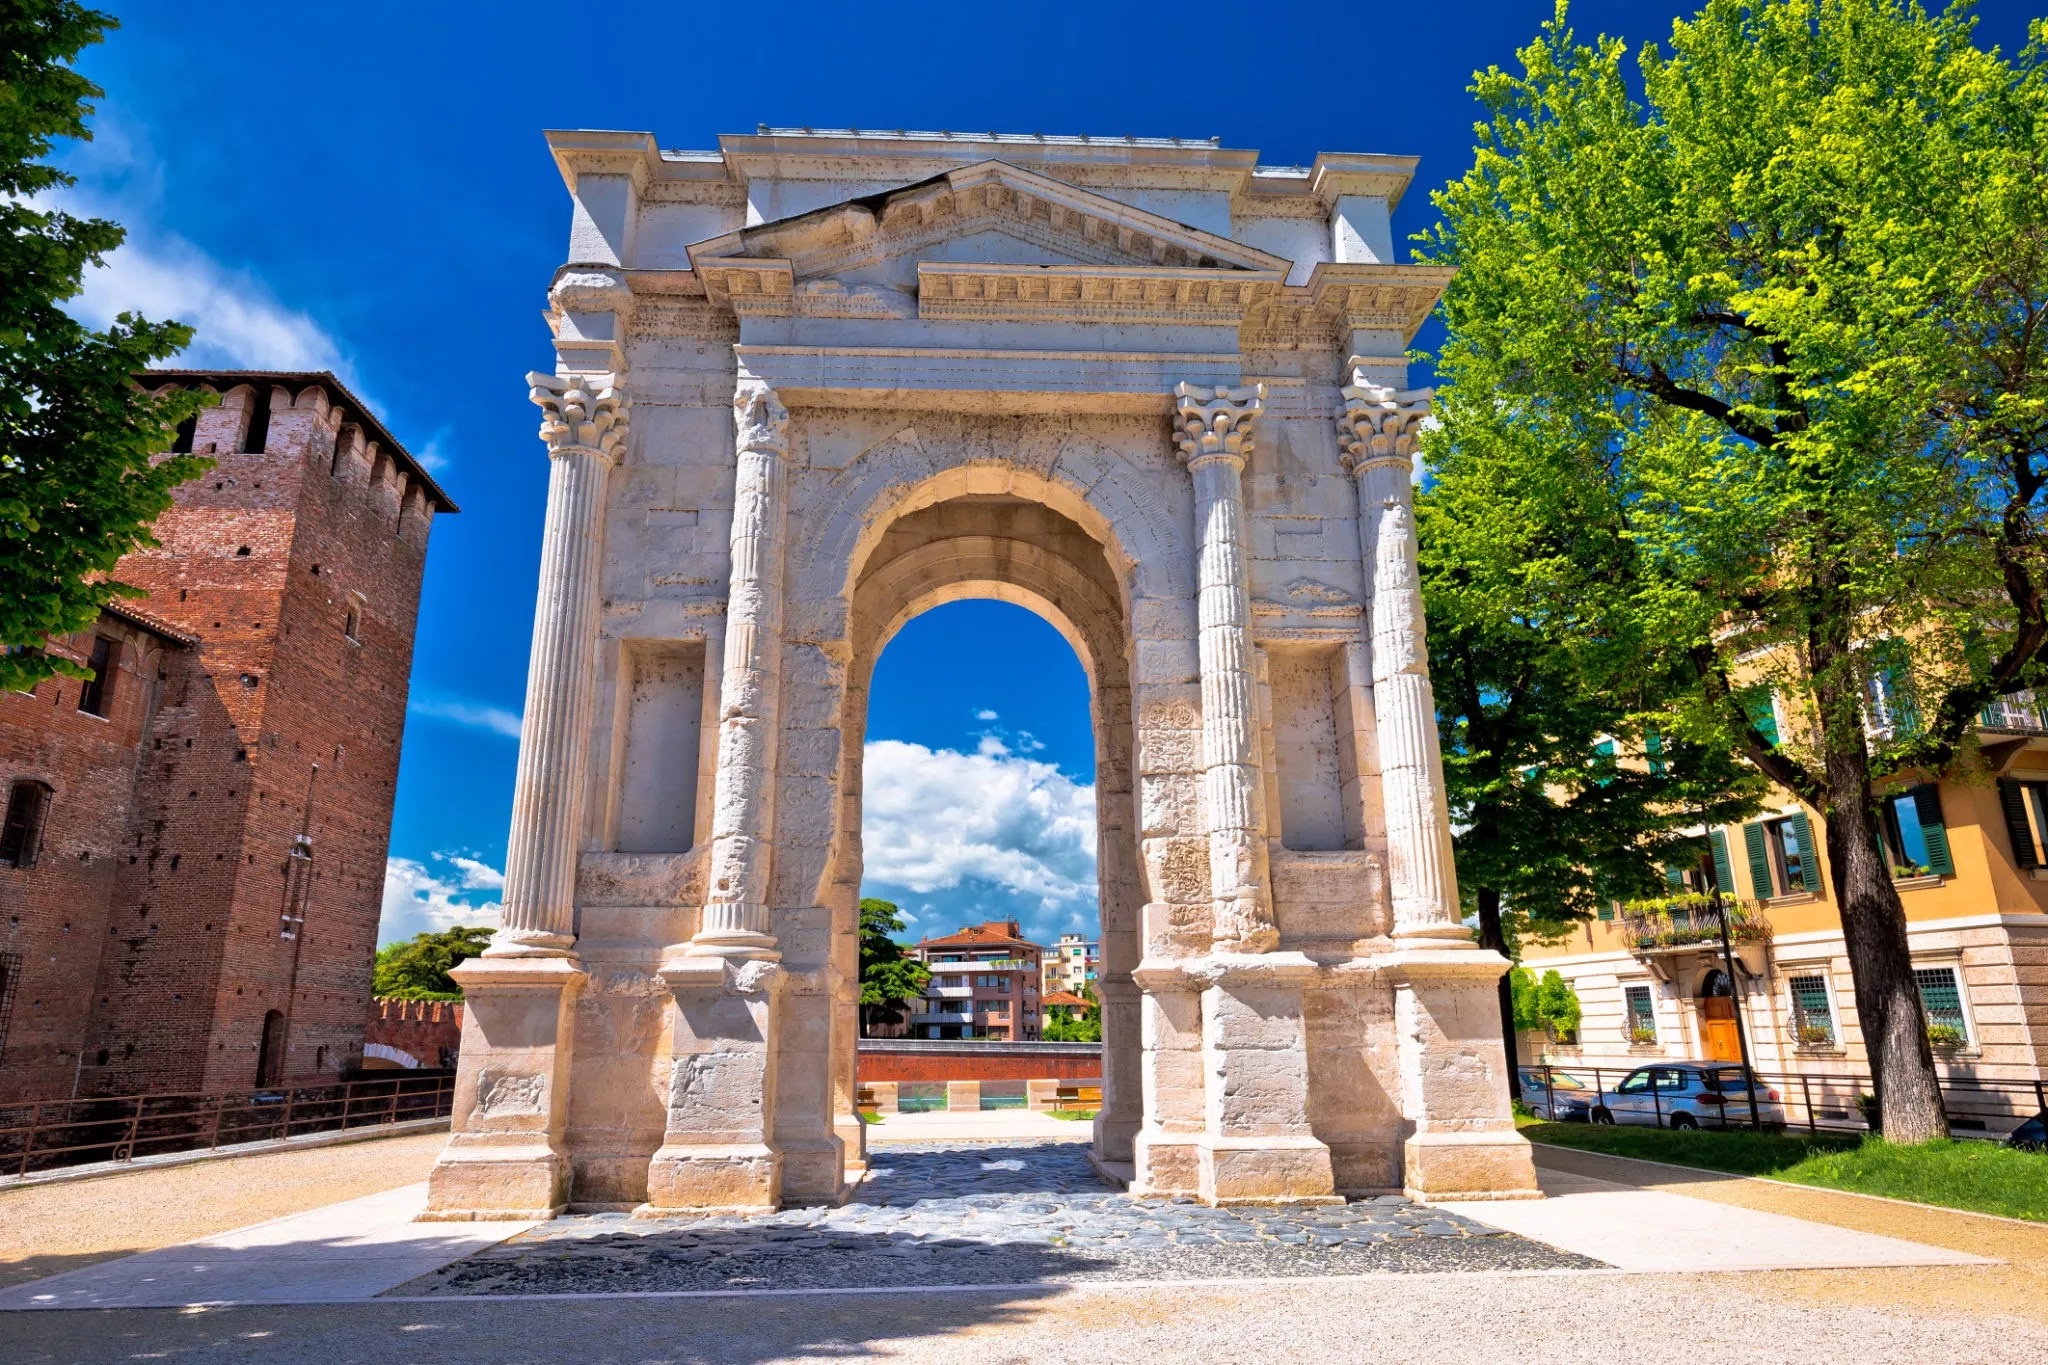 Arch of Gavi in Italy, Europe | Architecture - Rated 3.6